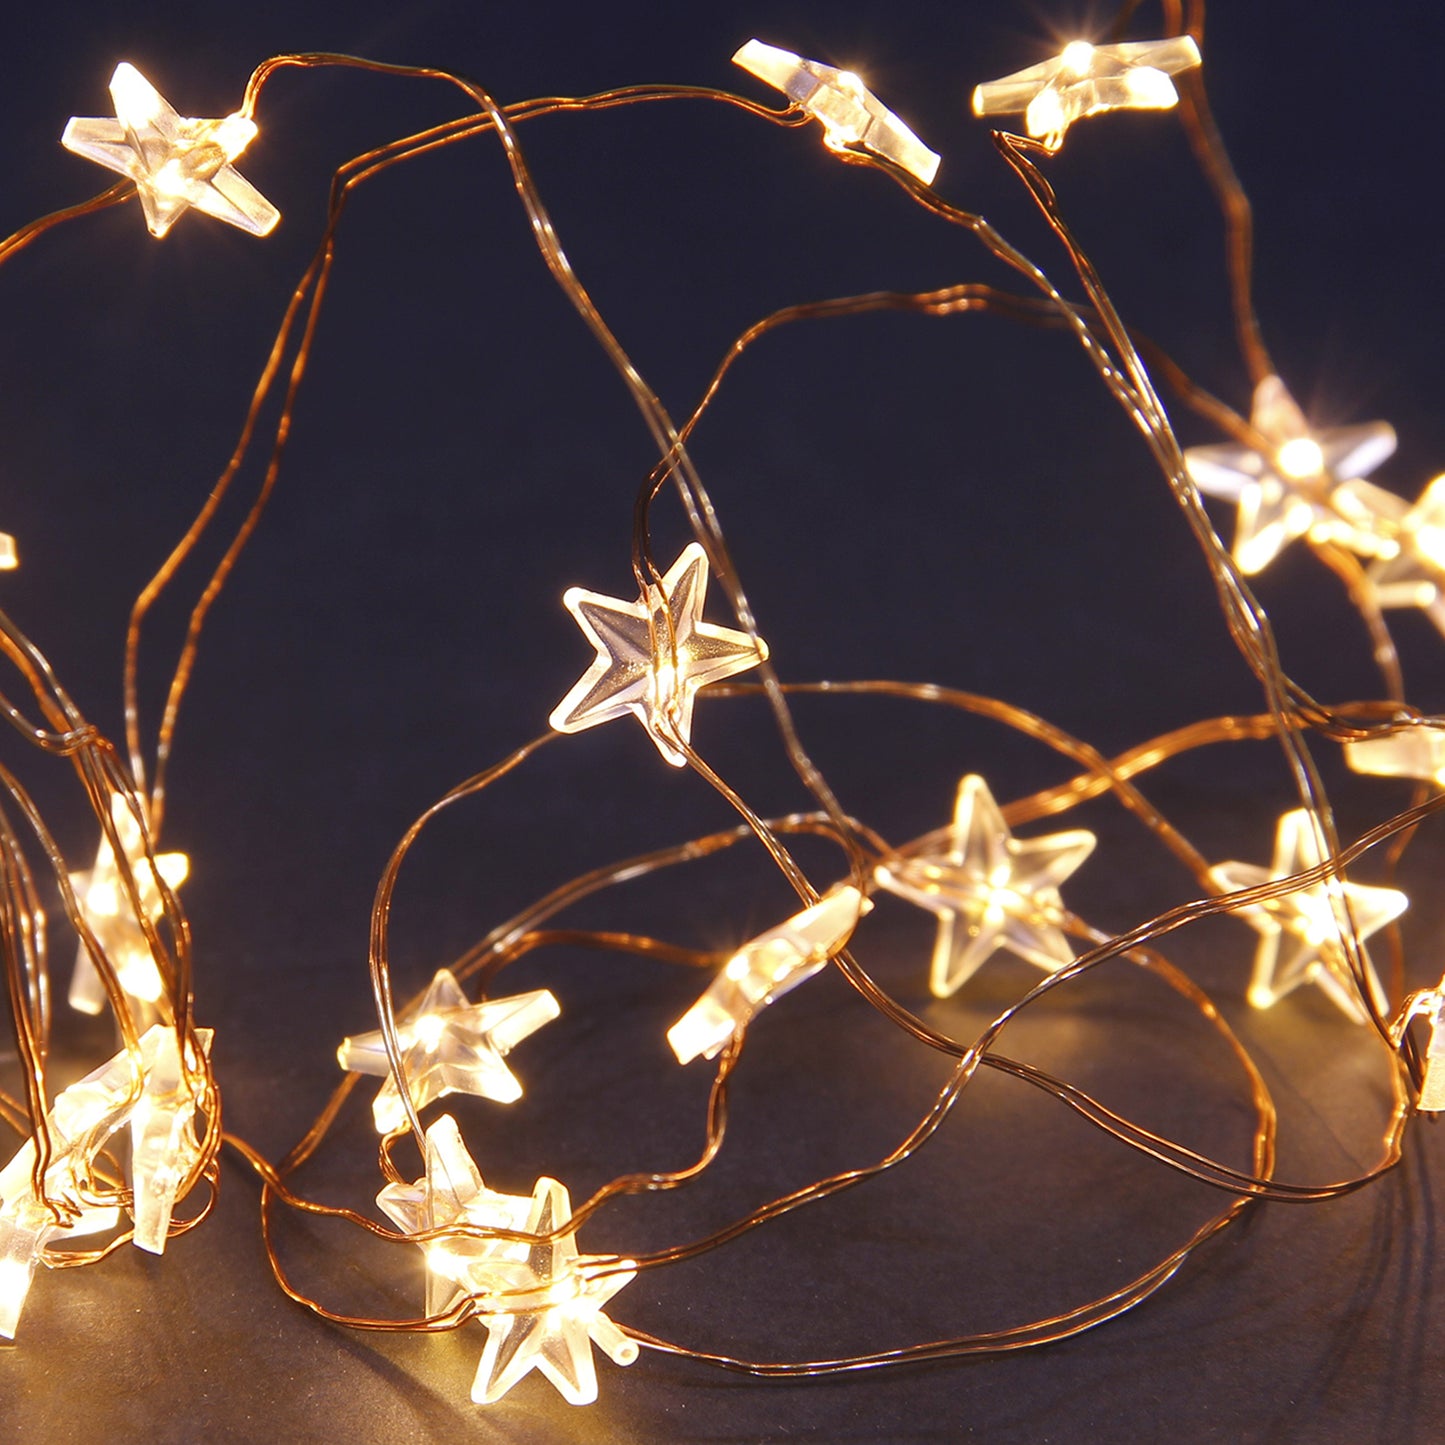 50 Star Copper Wire Solar Outdoor String Lights